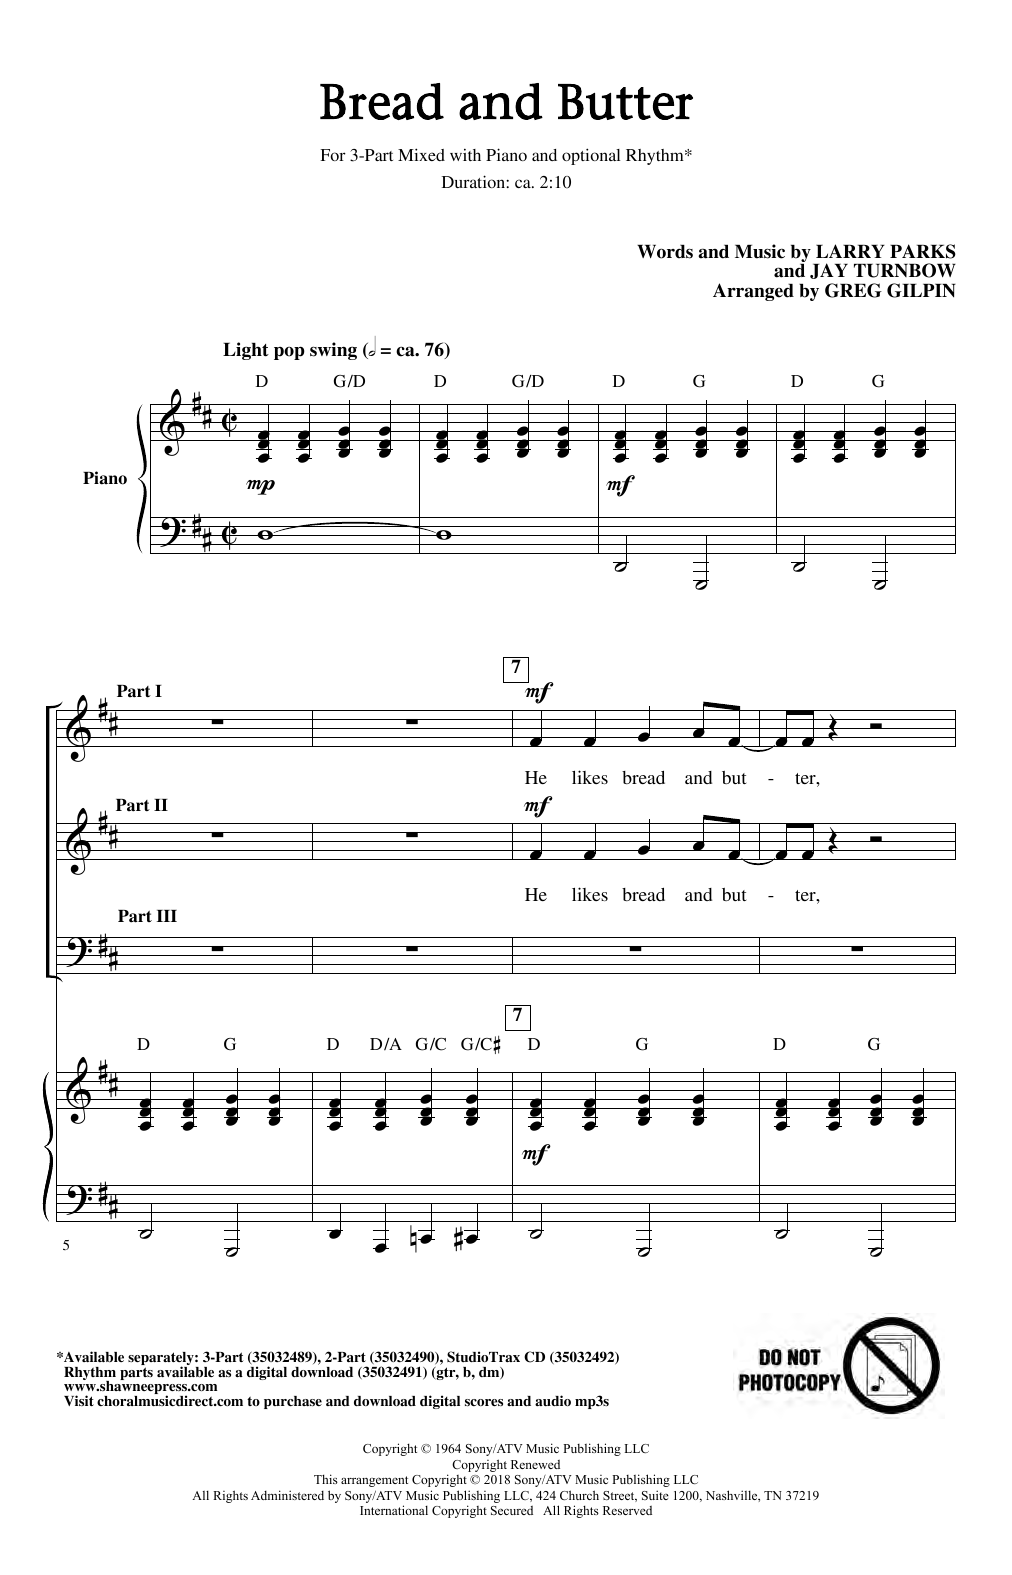 Download Larry Parks & Jay Turnbow Bread And Butter (arr. Greg Gilpin) Sheet Music